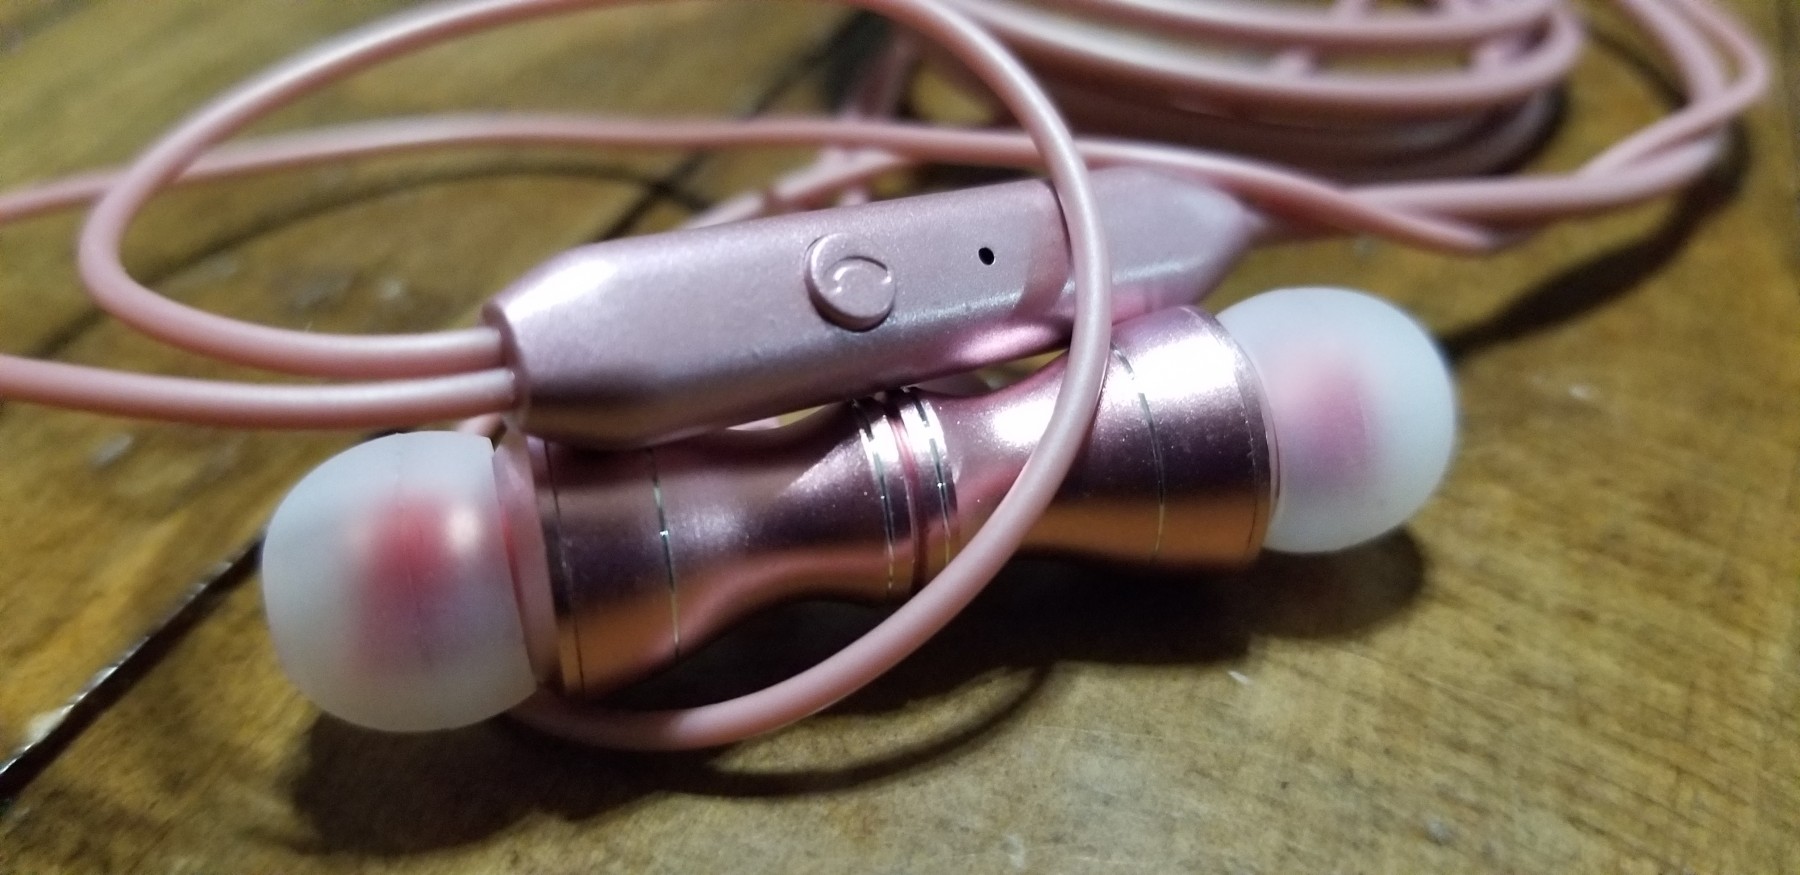 Interesting earbuds